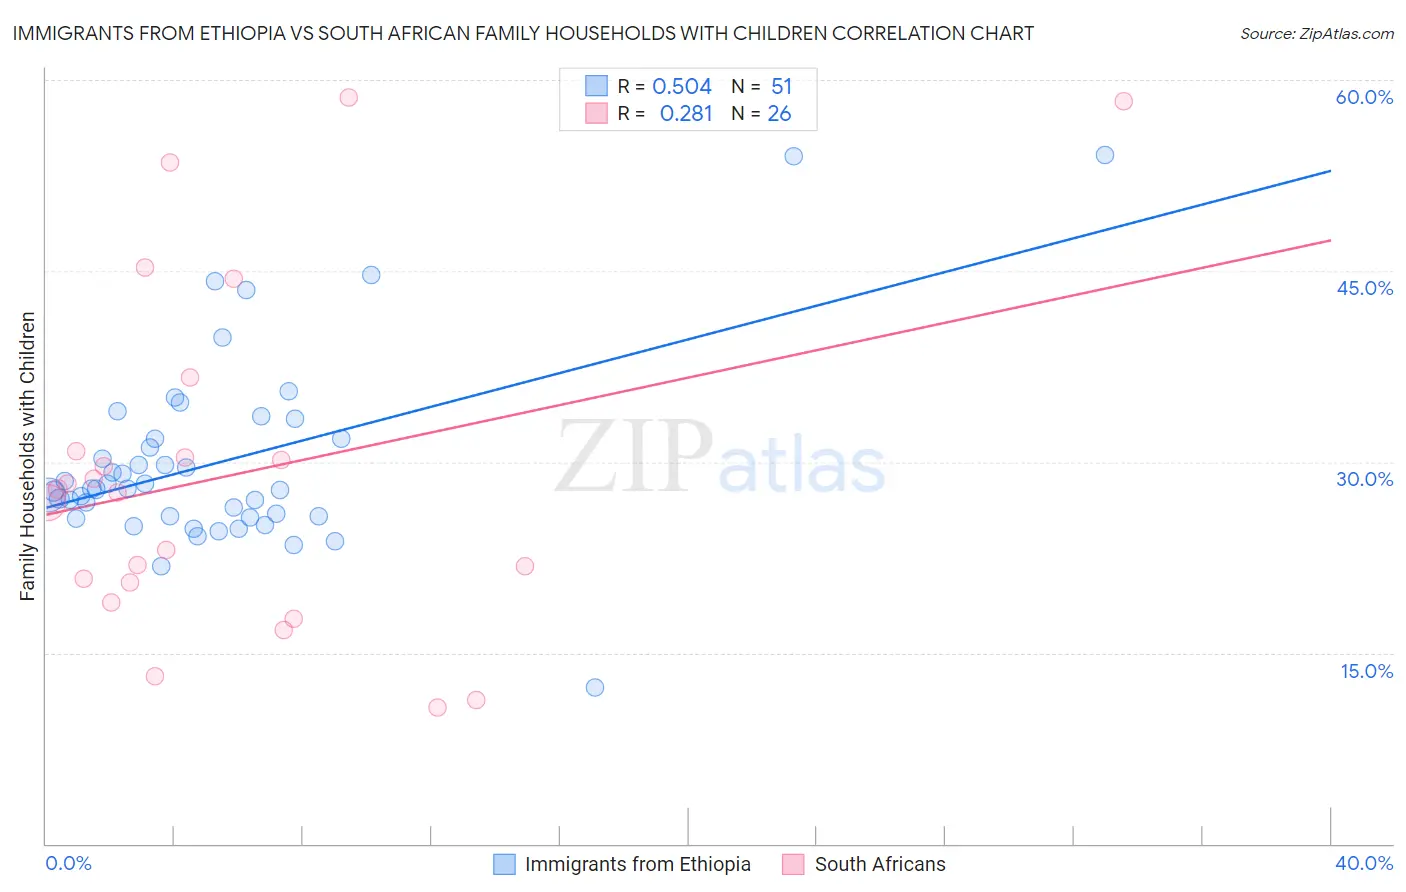 Immigrants from Ethiopia vs South African Family Households with Children